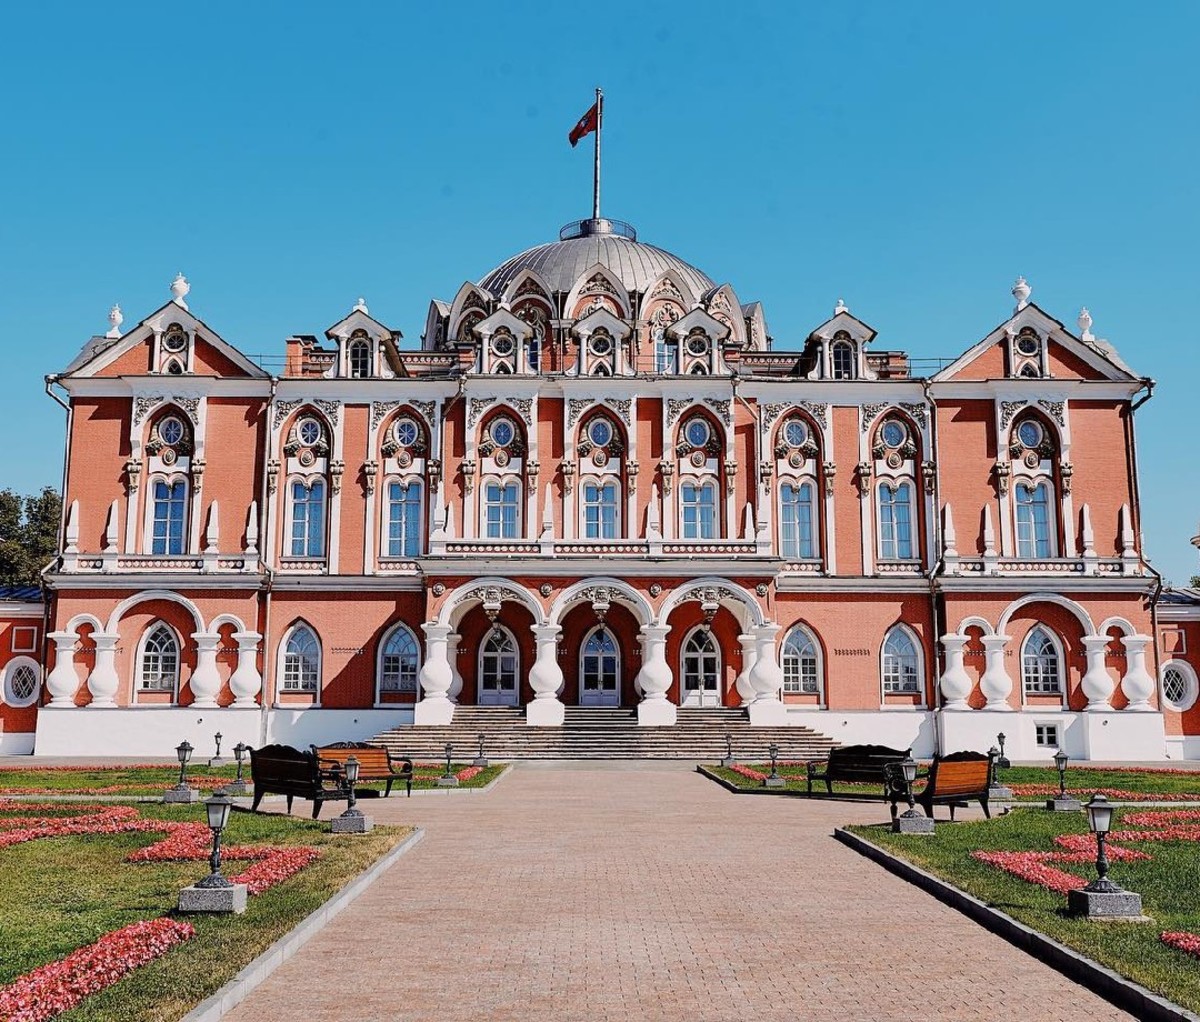 An exterior image of the Petroff Palace in Moscow, Russia